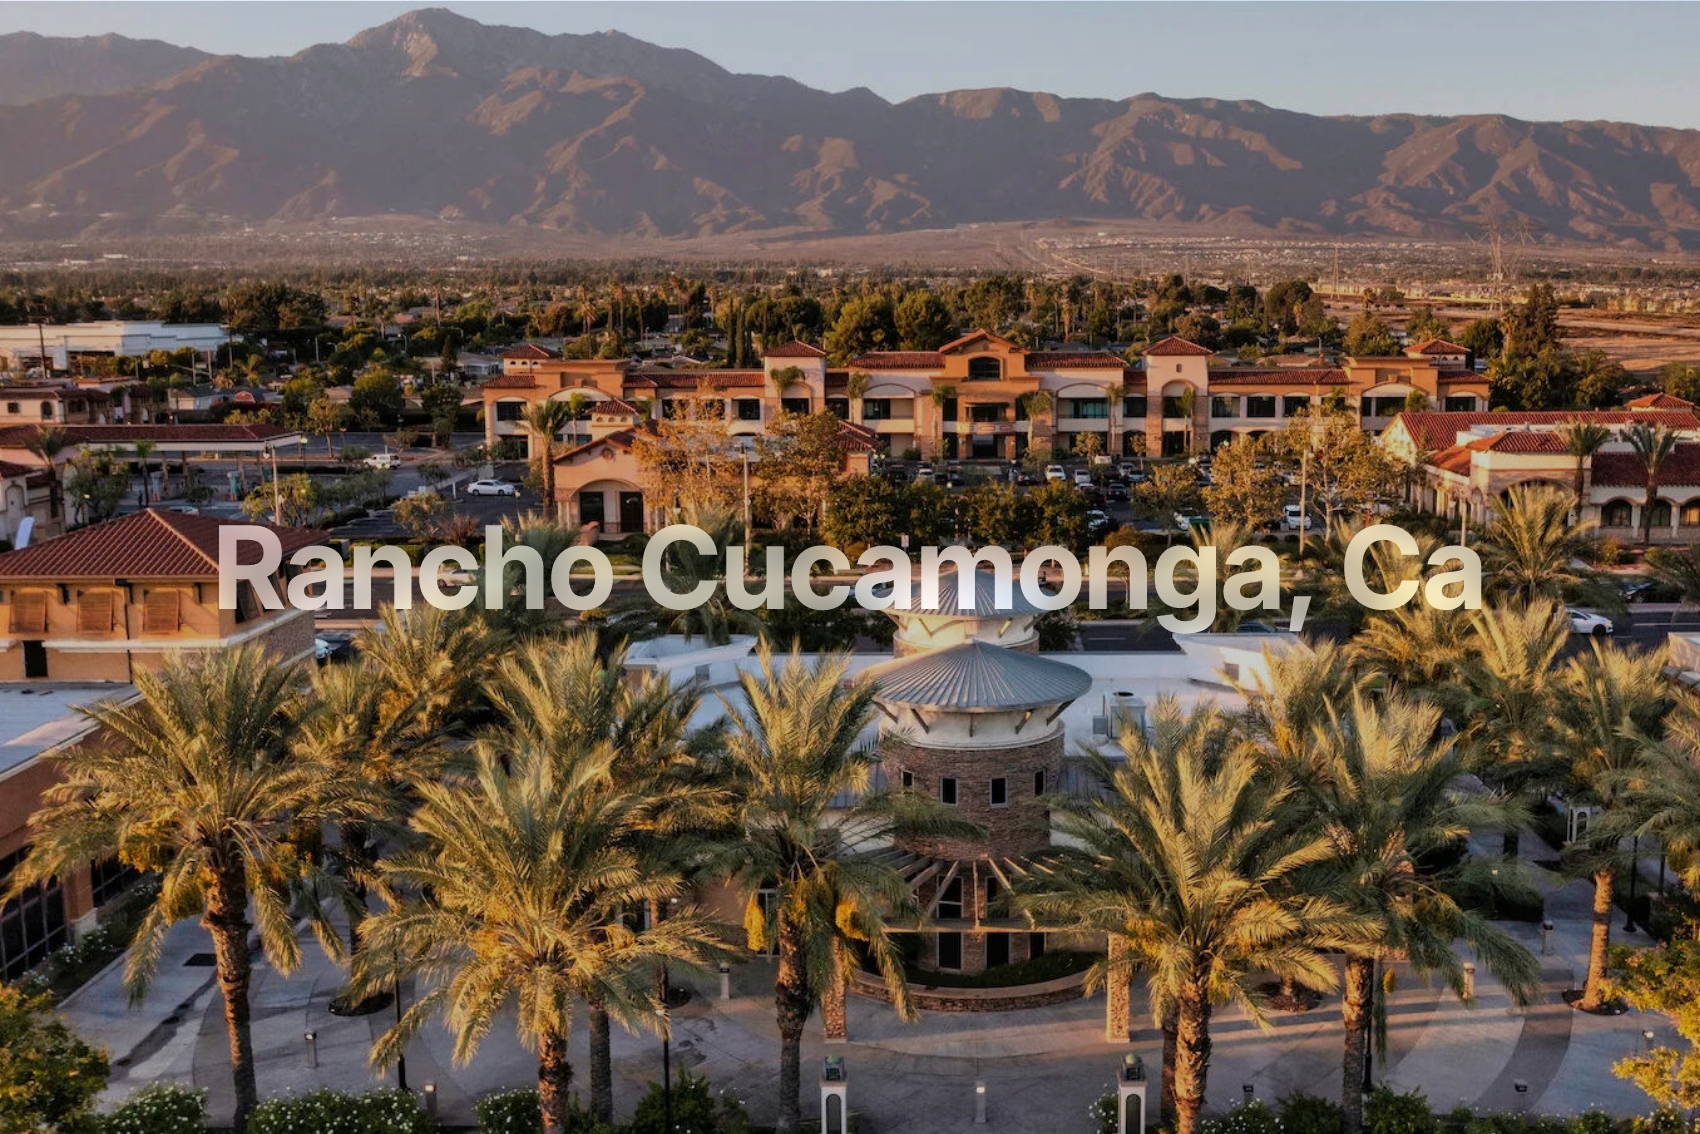 Image of the city of Rancho Cucamonga, Ca